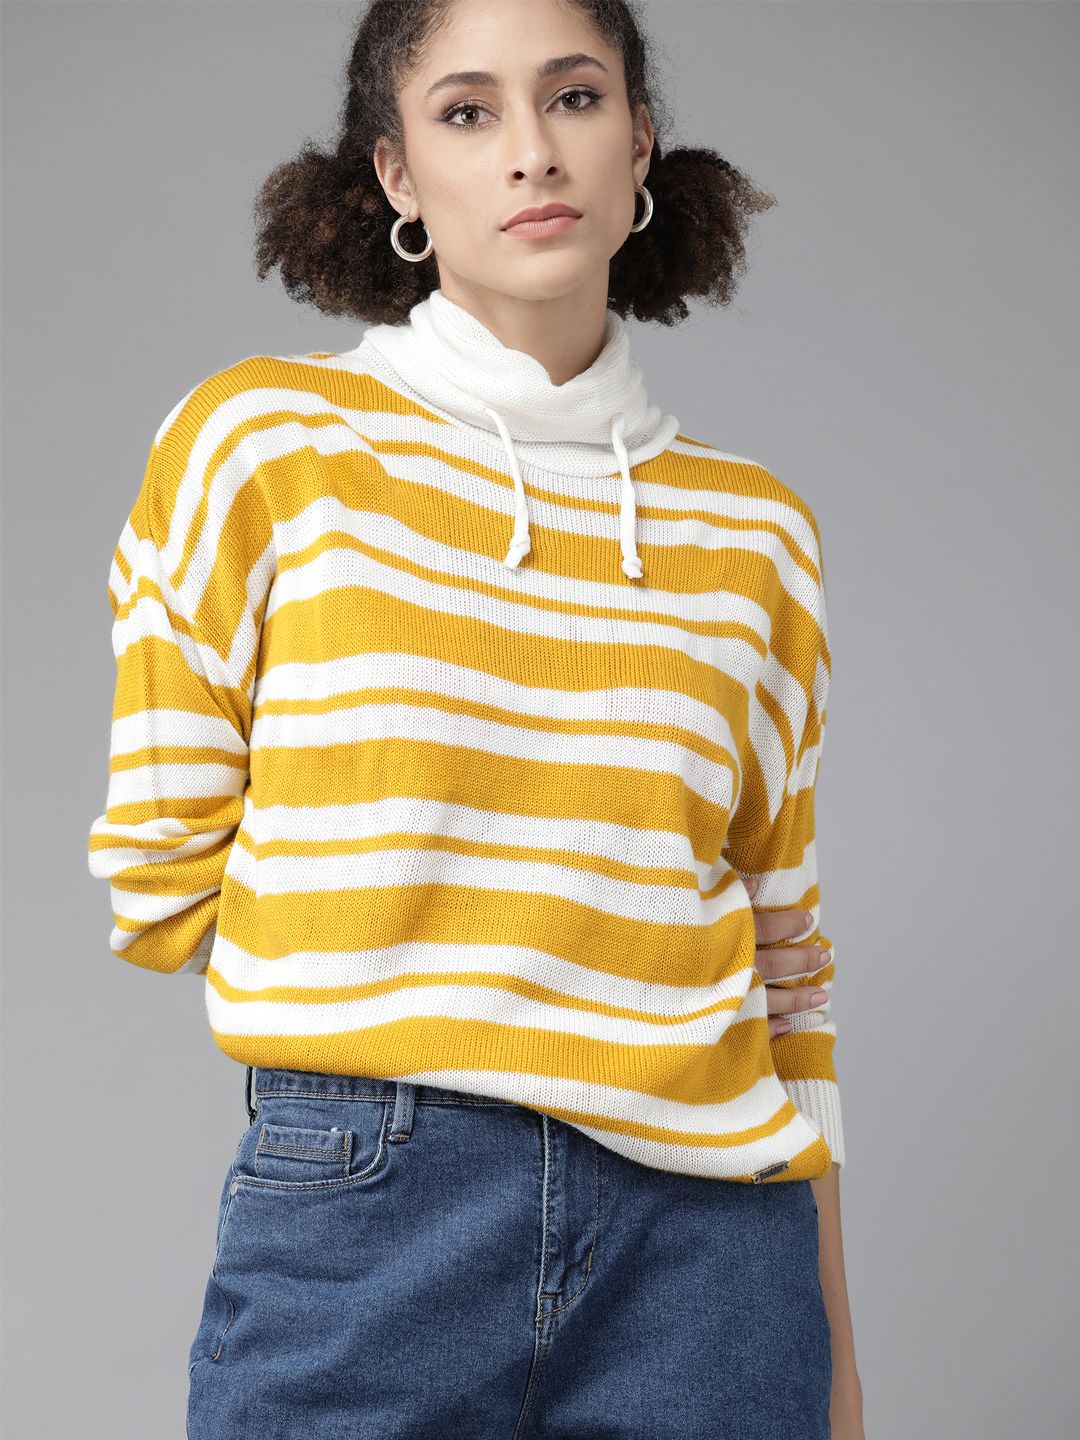 Roadster Women Yellow & White Striped Pullover Price in India